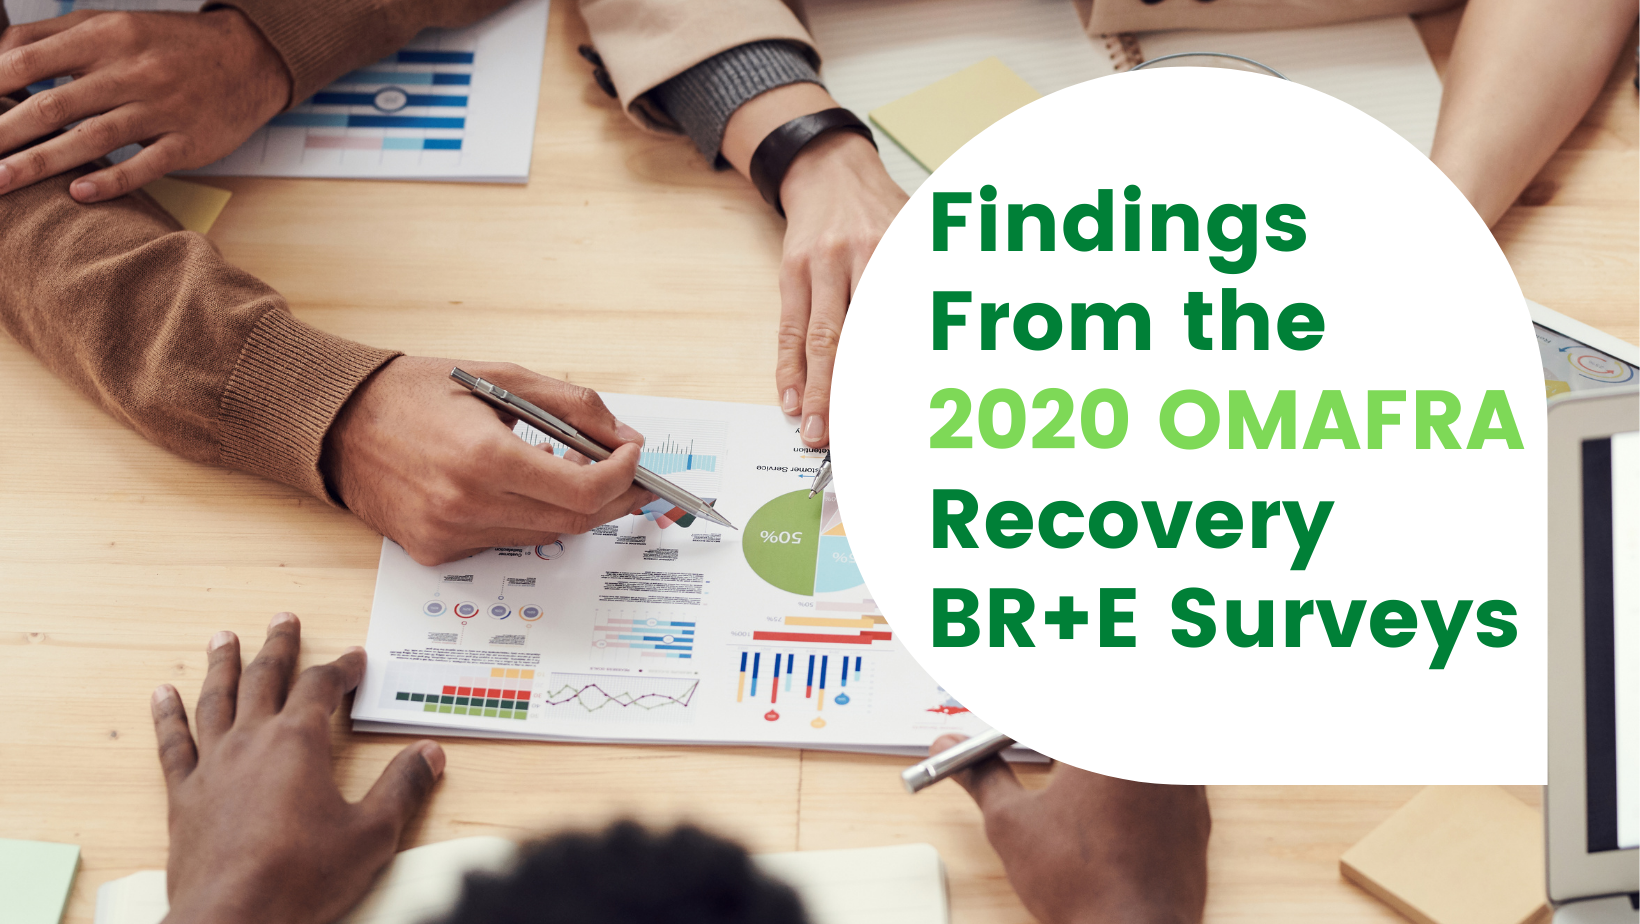 Findings From the 2020 OMAFRA Recovery BR+E Surveys